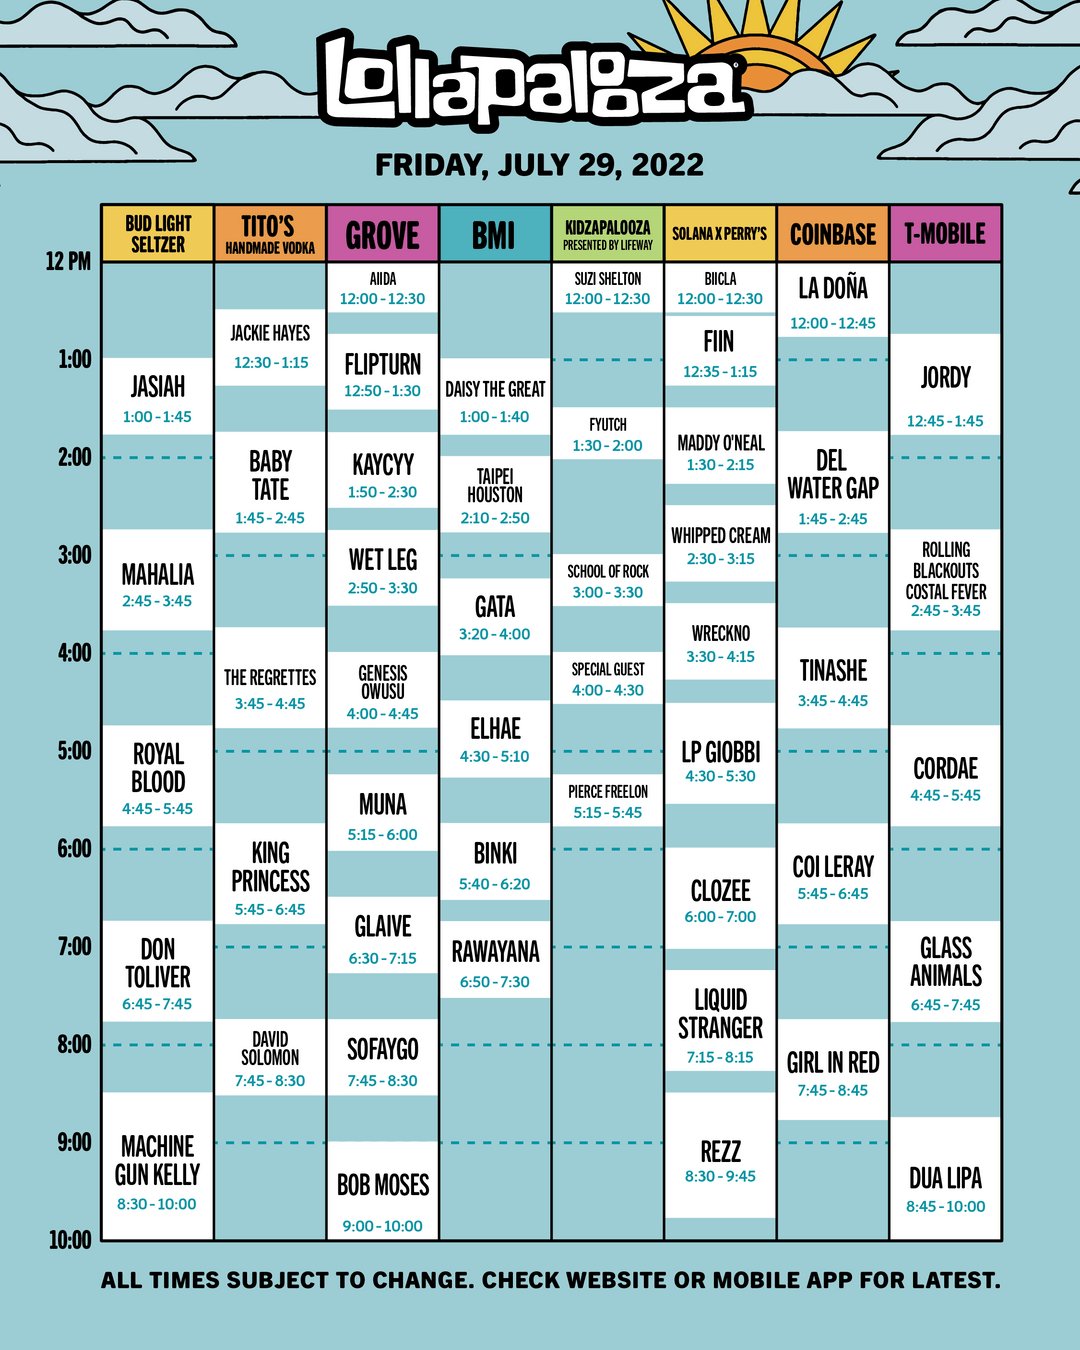 2022 Lollapalooza Schedule Announced 3